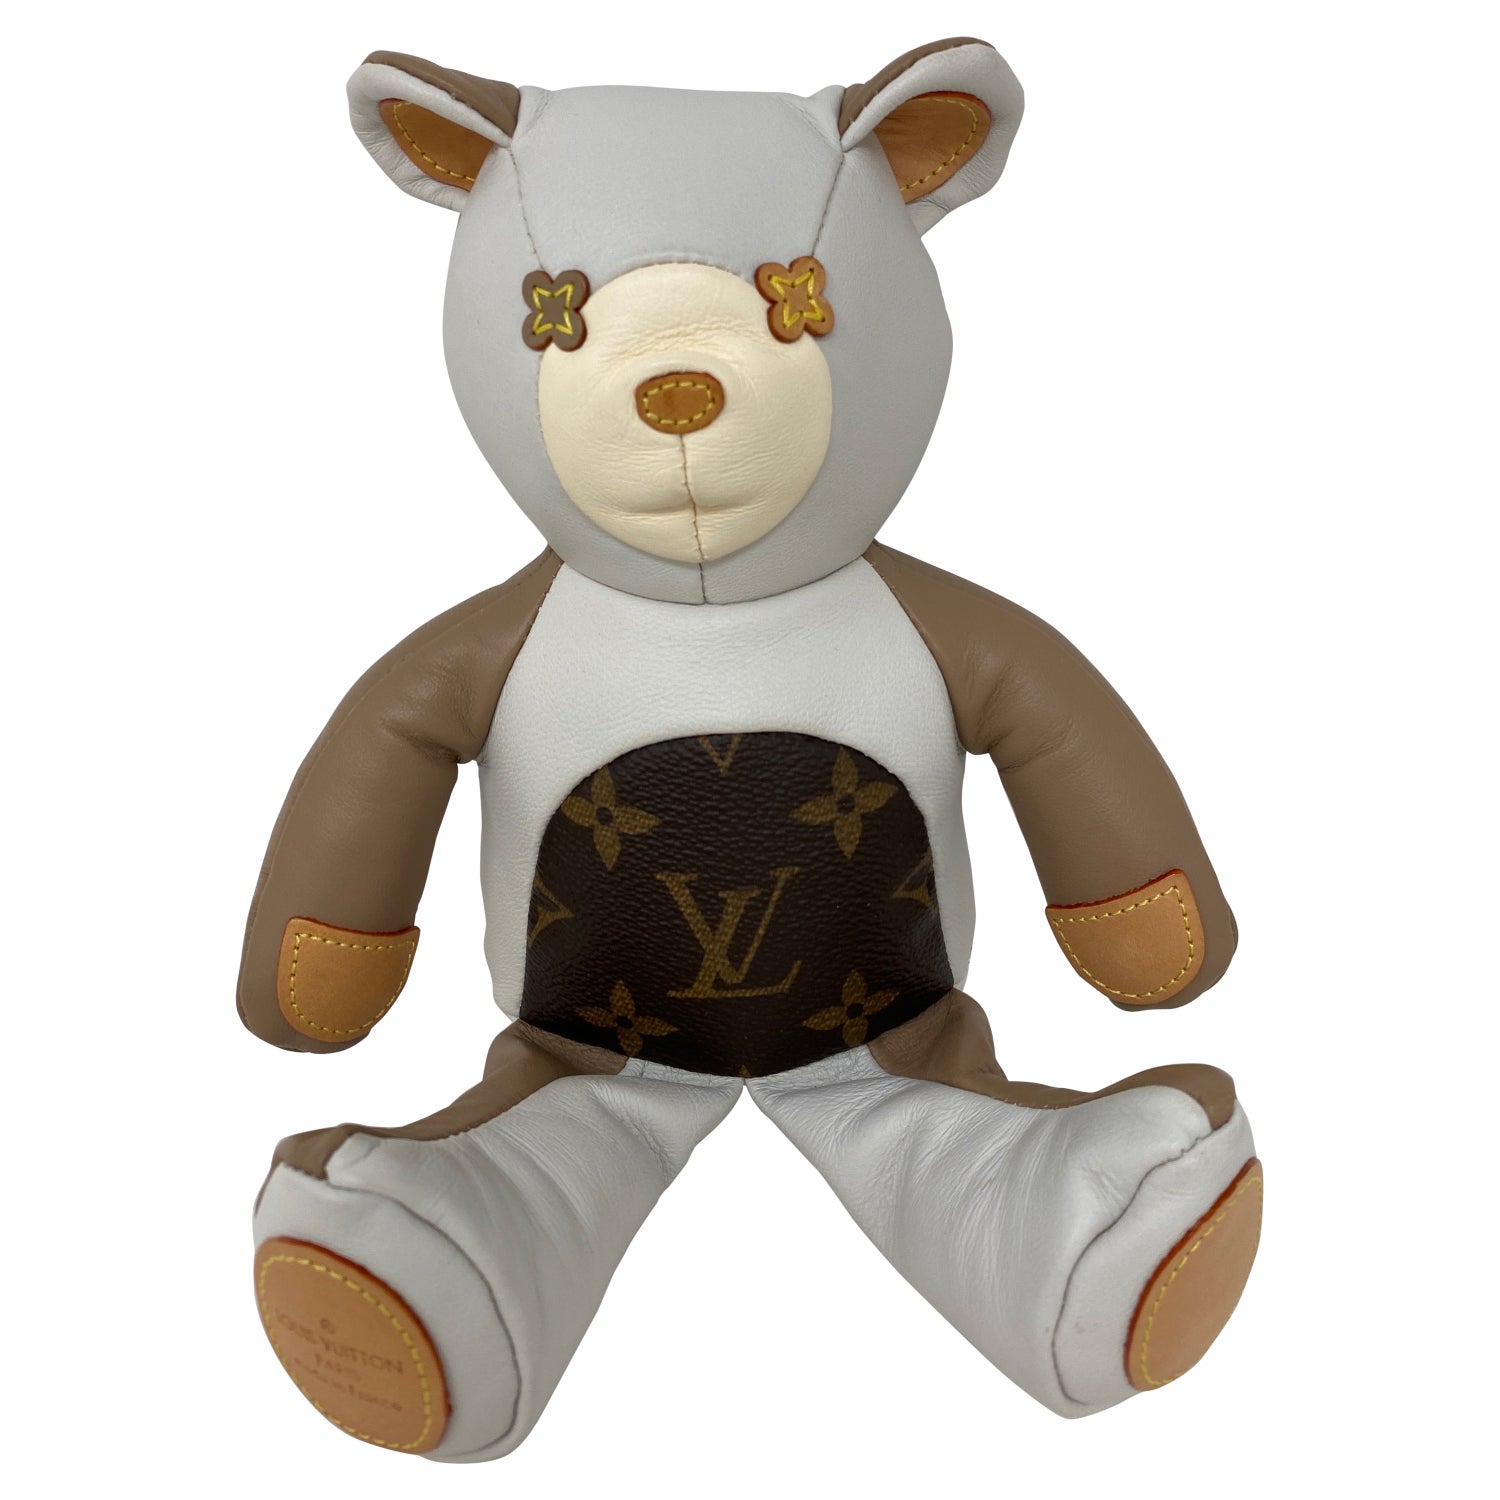 Lv Teddy Bear - For Sale on 1stDibs  louis vuitton teddy bear, louis  vuitton steiff bear, louis vuitton toy